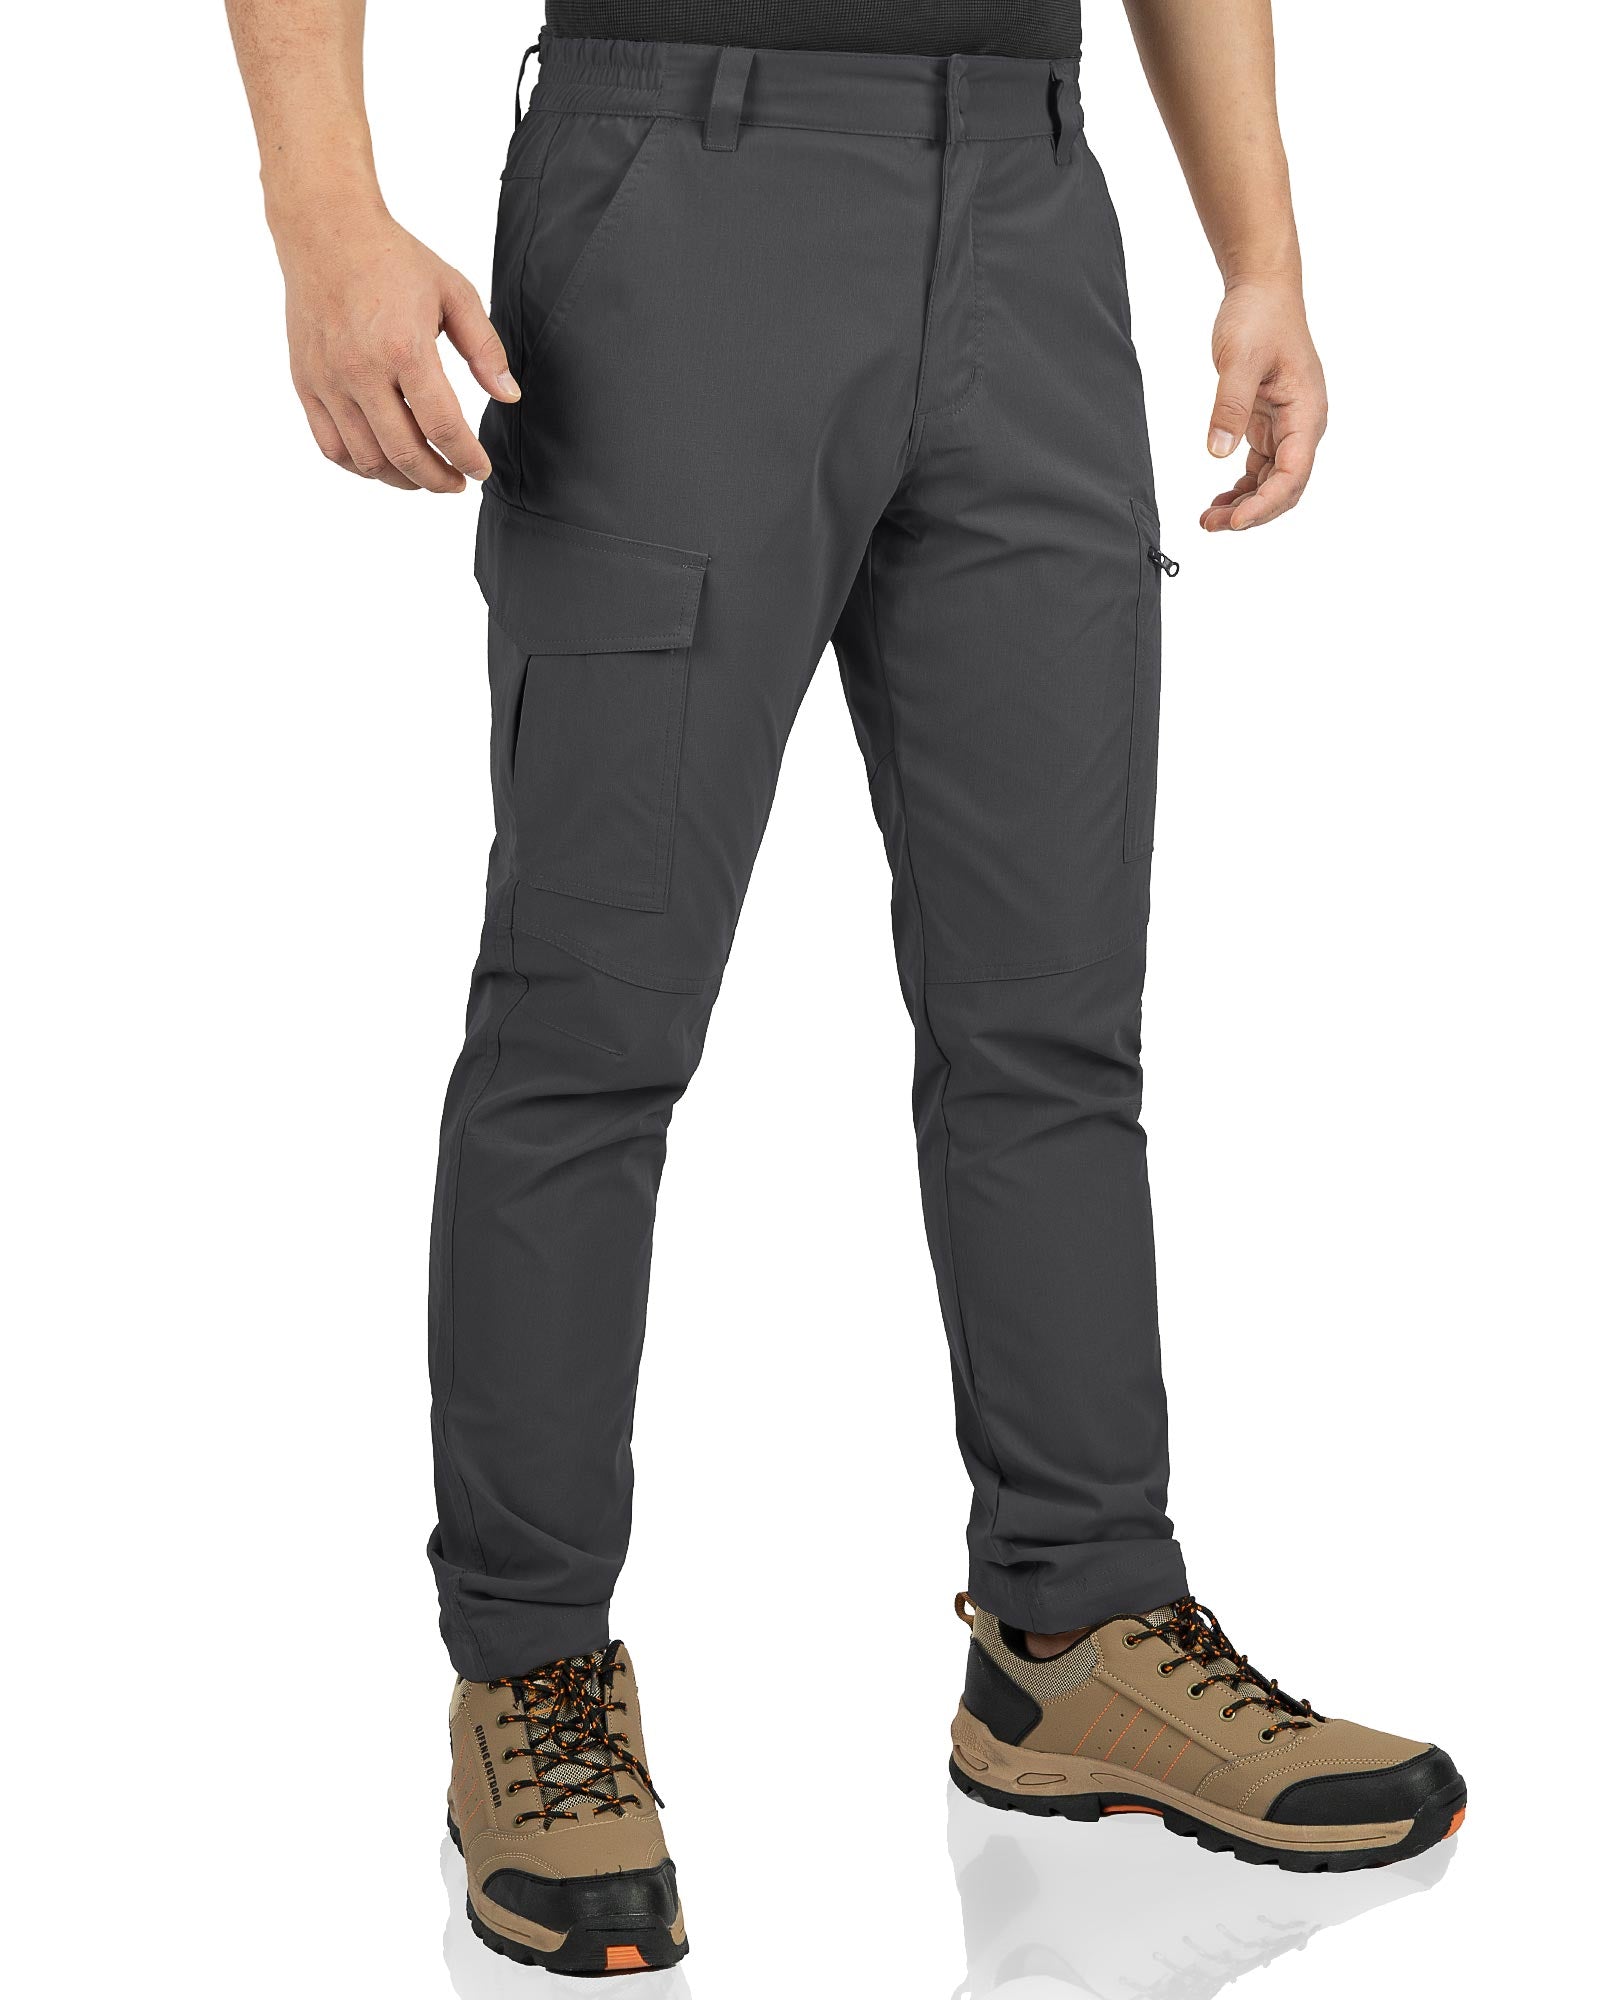 Men's Water Resistant Hiking Cargo Pants with 6 Pockets – 33,000ft